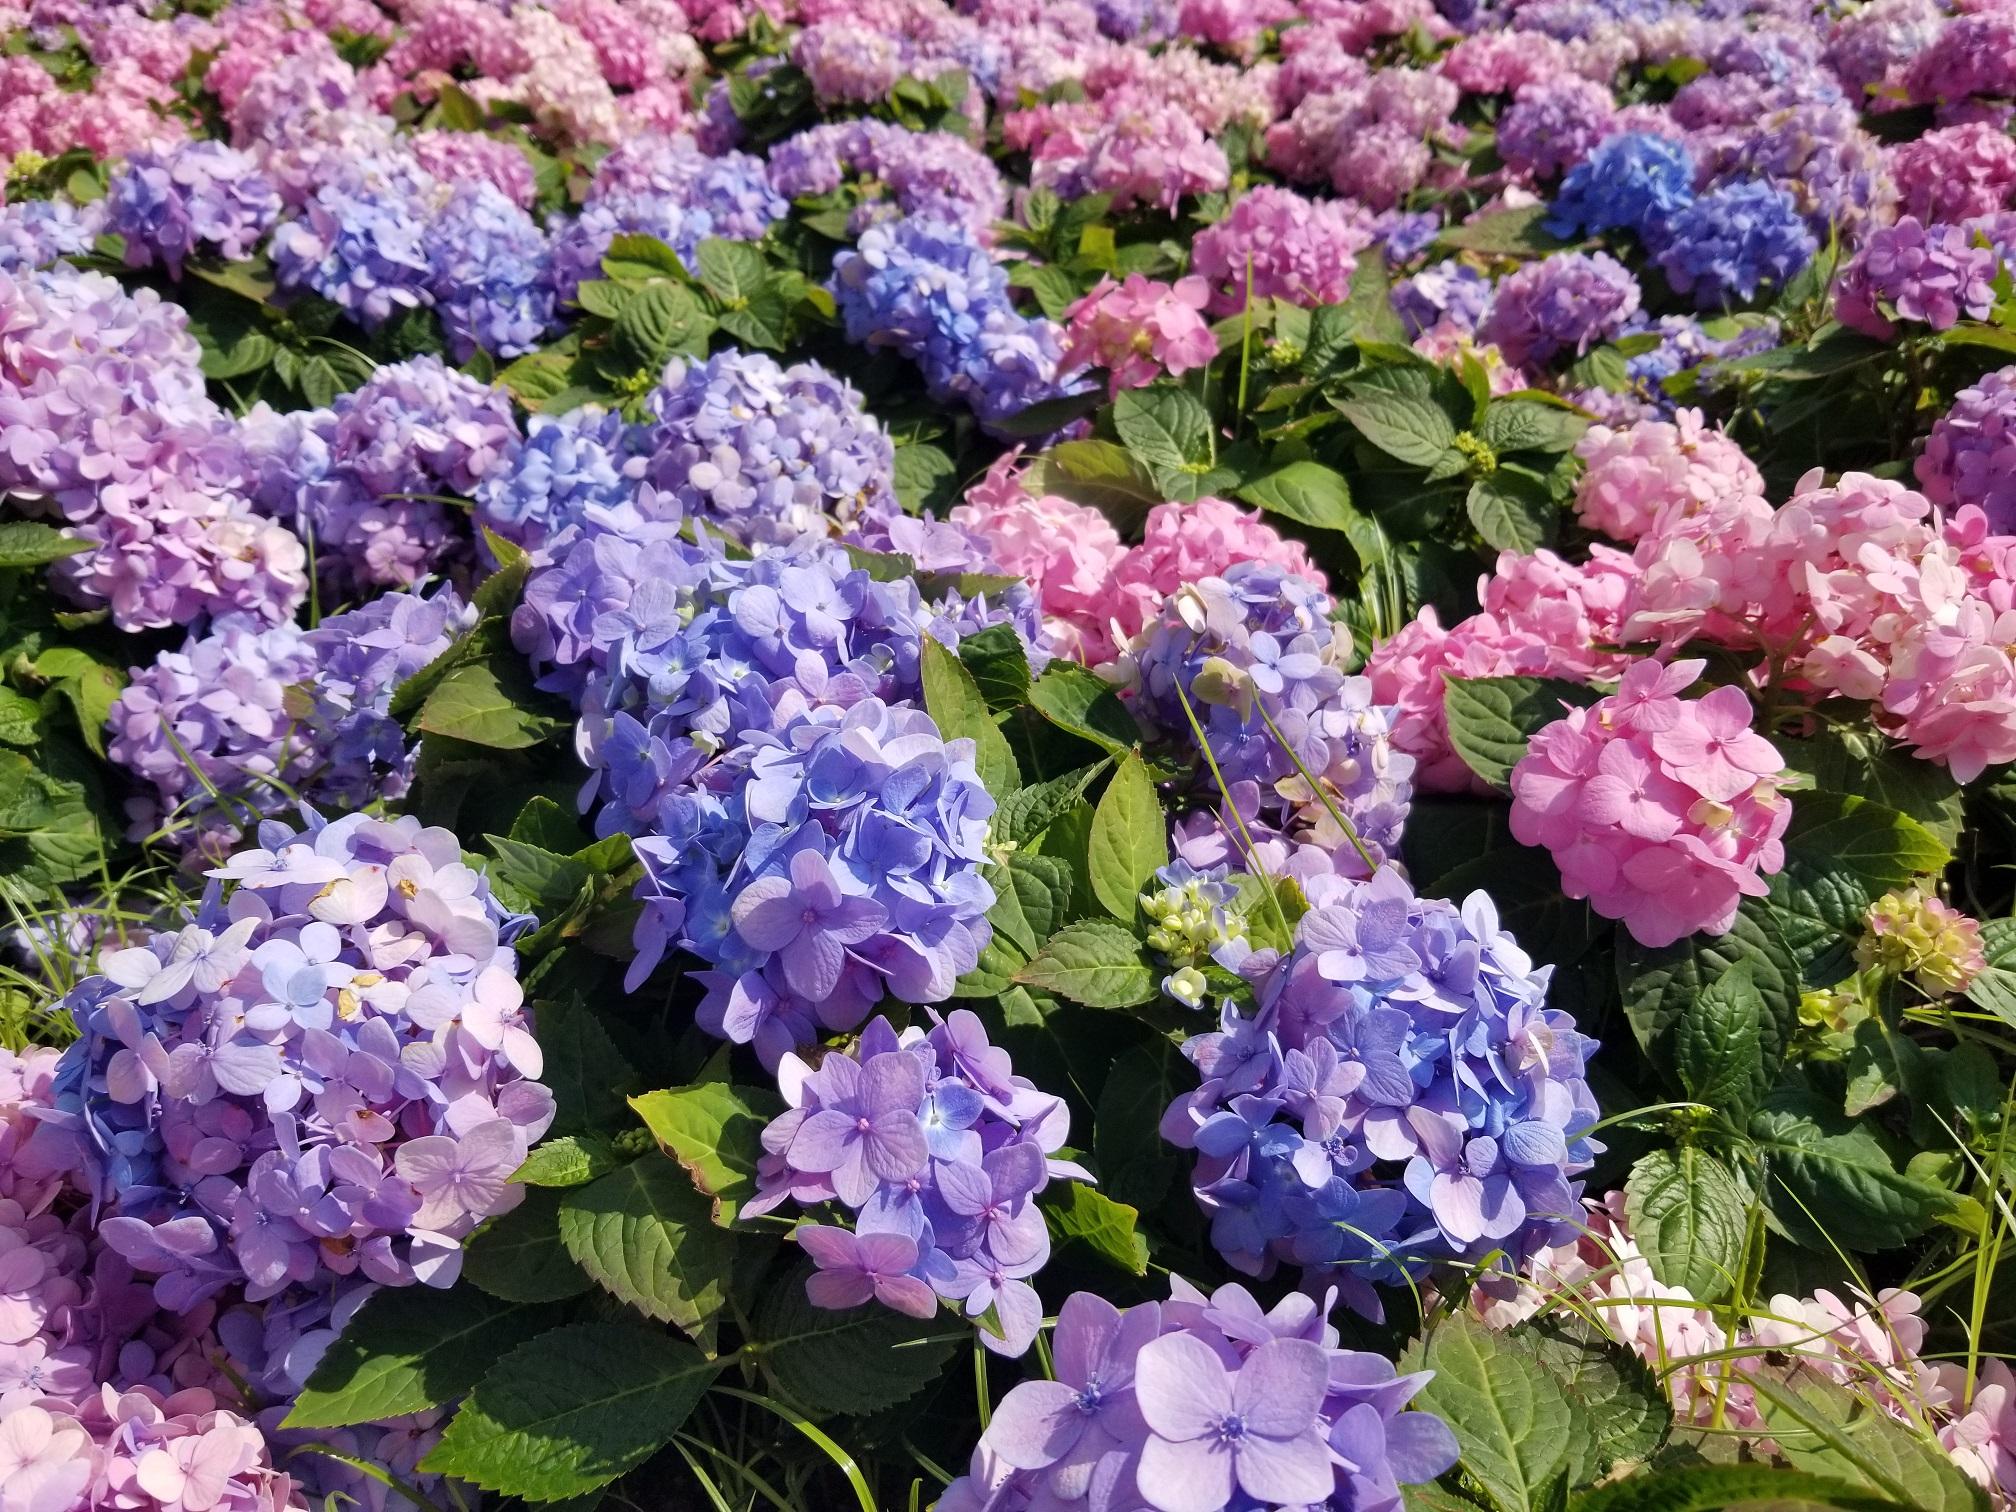 The Hong Kong Flower Show will be held from March 10 to 19 in Victoria Park, with the gorgeous and uniquely grown hydrangea as the theme flower. Looking big and glowing with charm, hydrangeas are extensively planted in gardens, floral displays and pots.